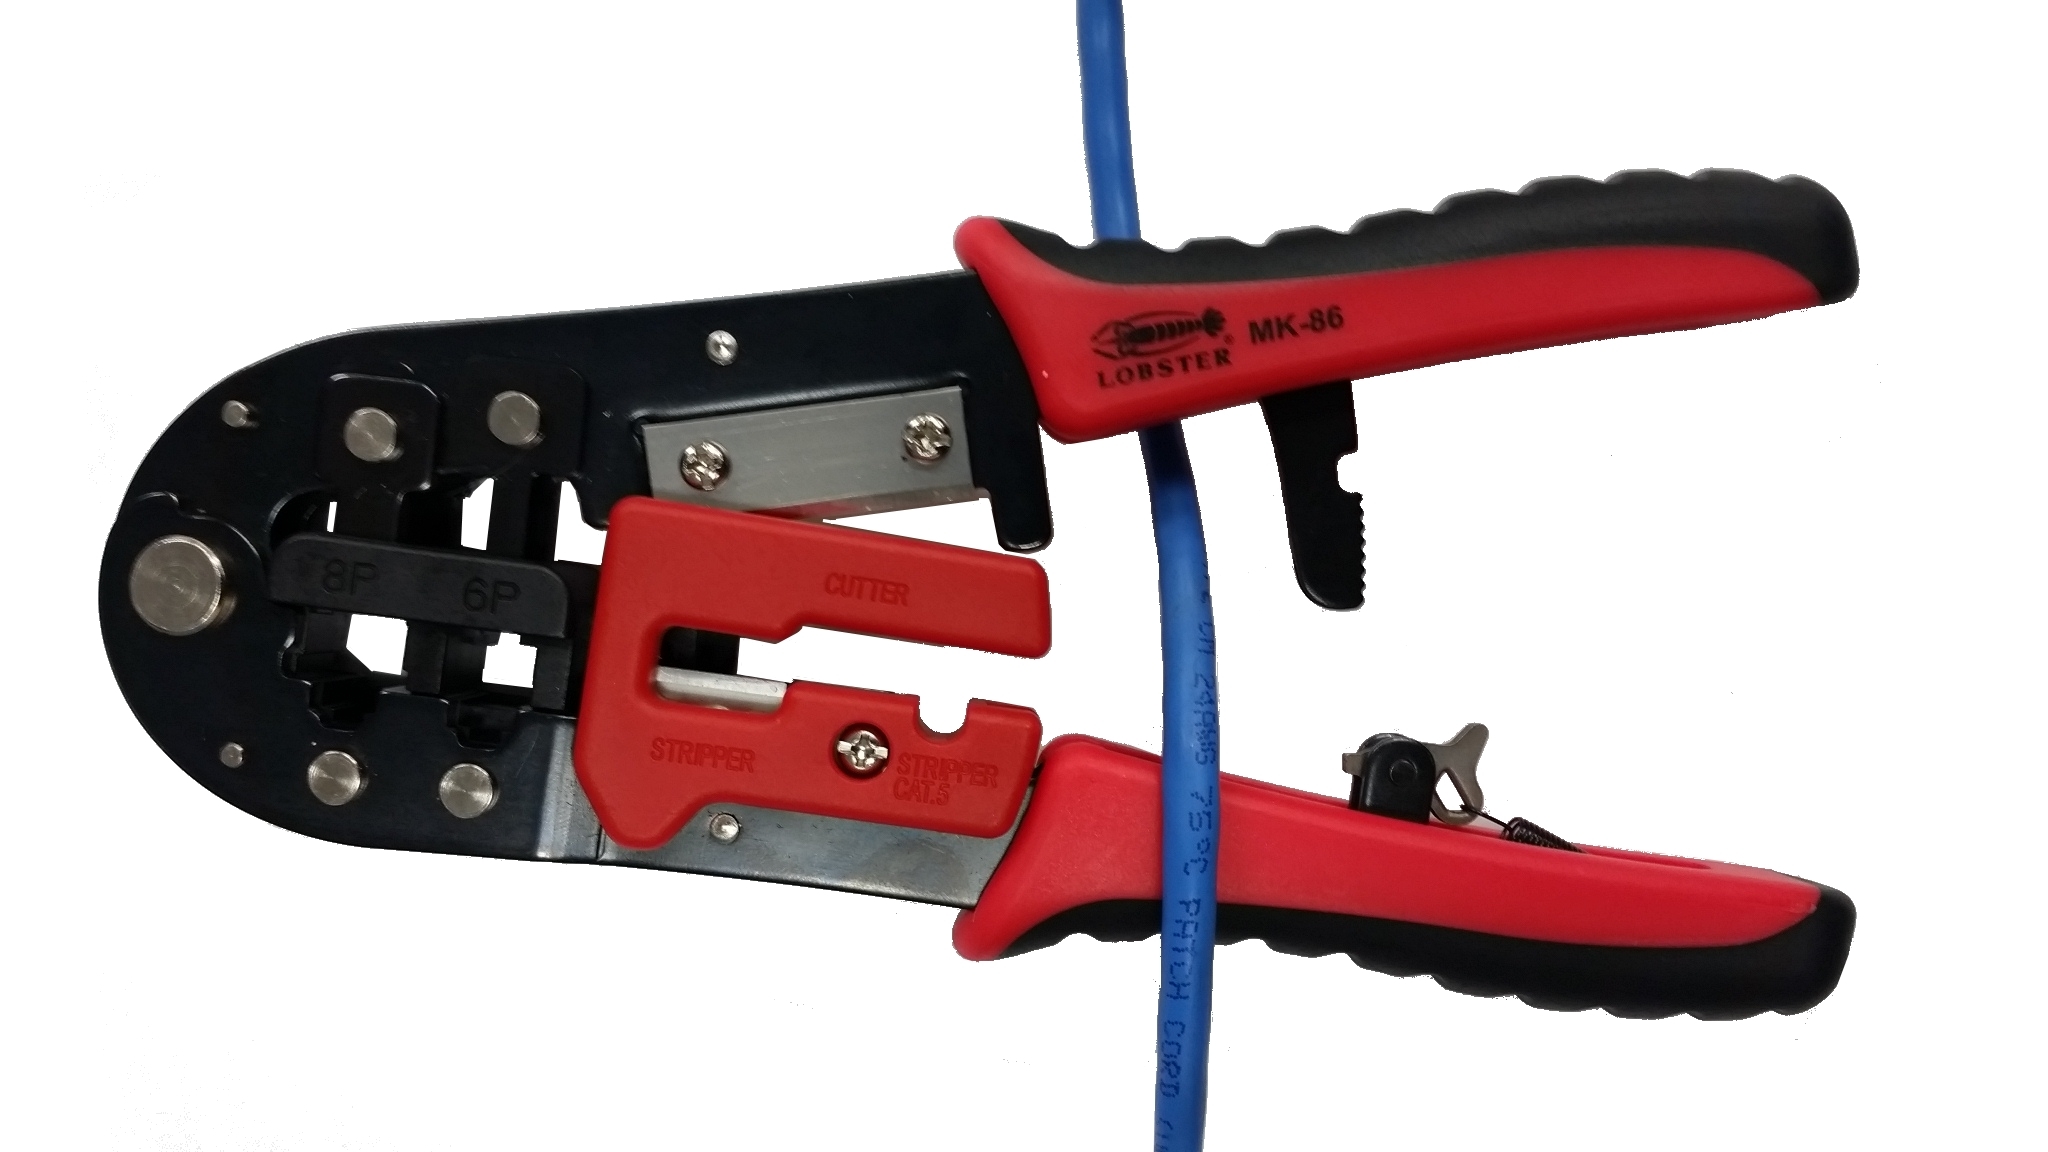 When the ratchet is released, both right and left arm is separated, making it easy to insert cables into the cutting area.